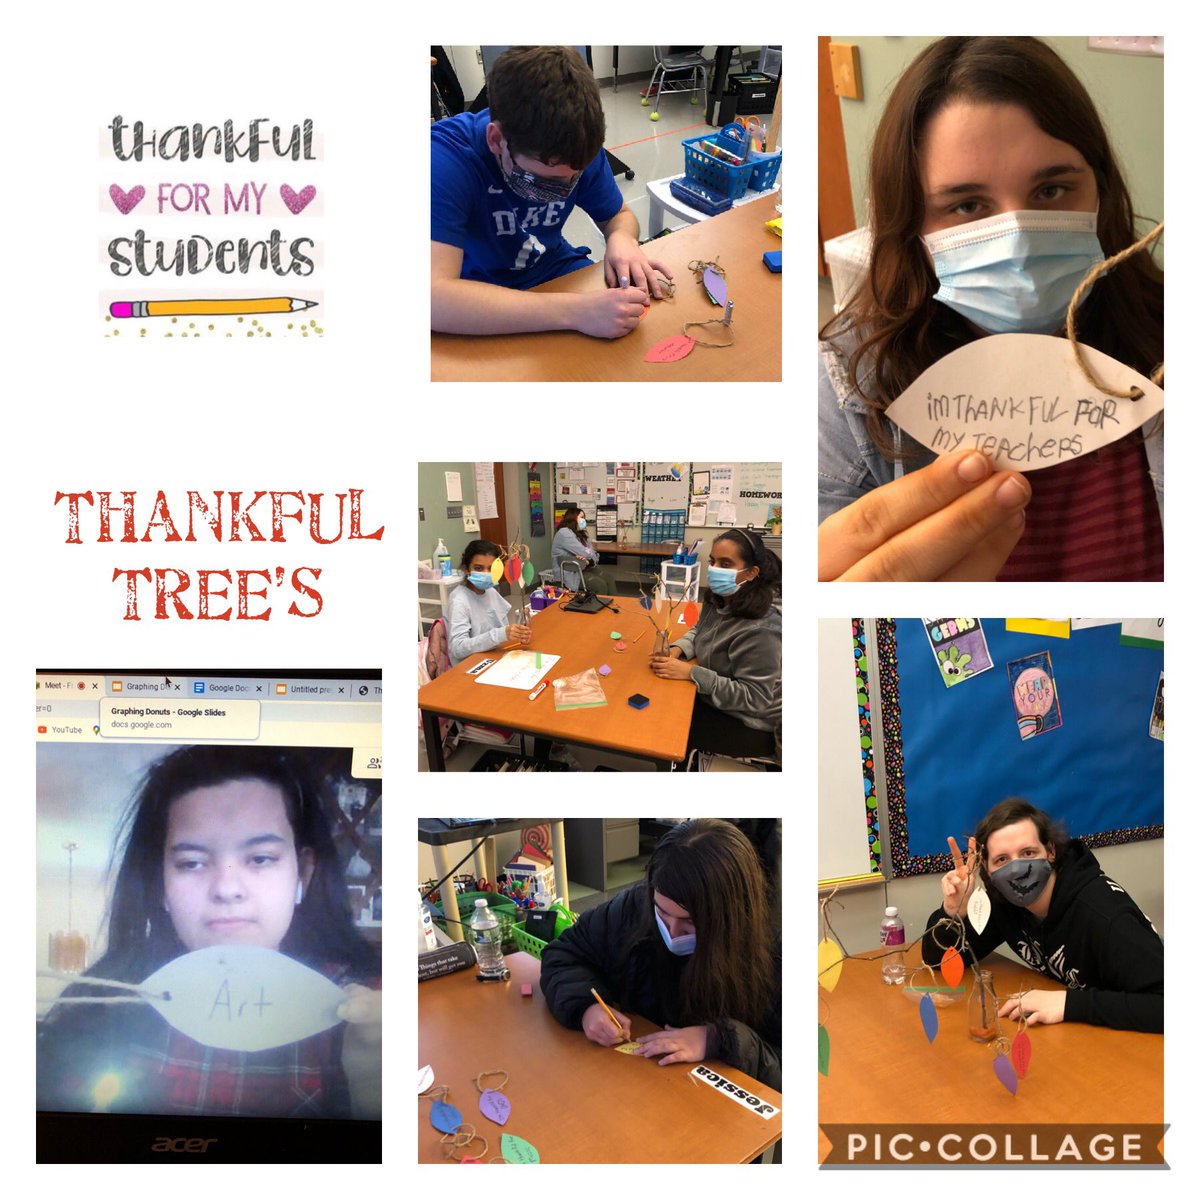 Fun Friday! We made Thankful Tree’s. Taking a minute to think about all the great things we have in our life! #luckyteacher#gratefulstudents